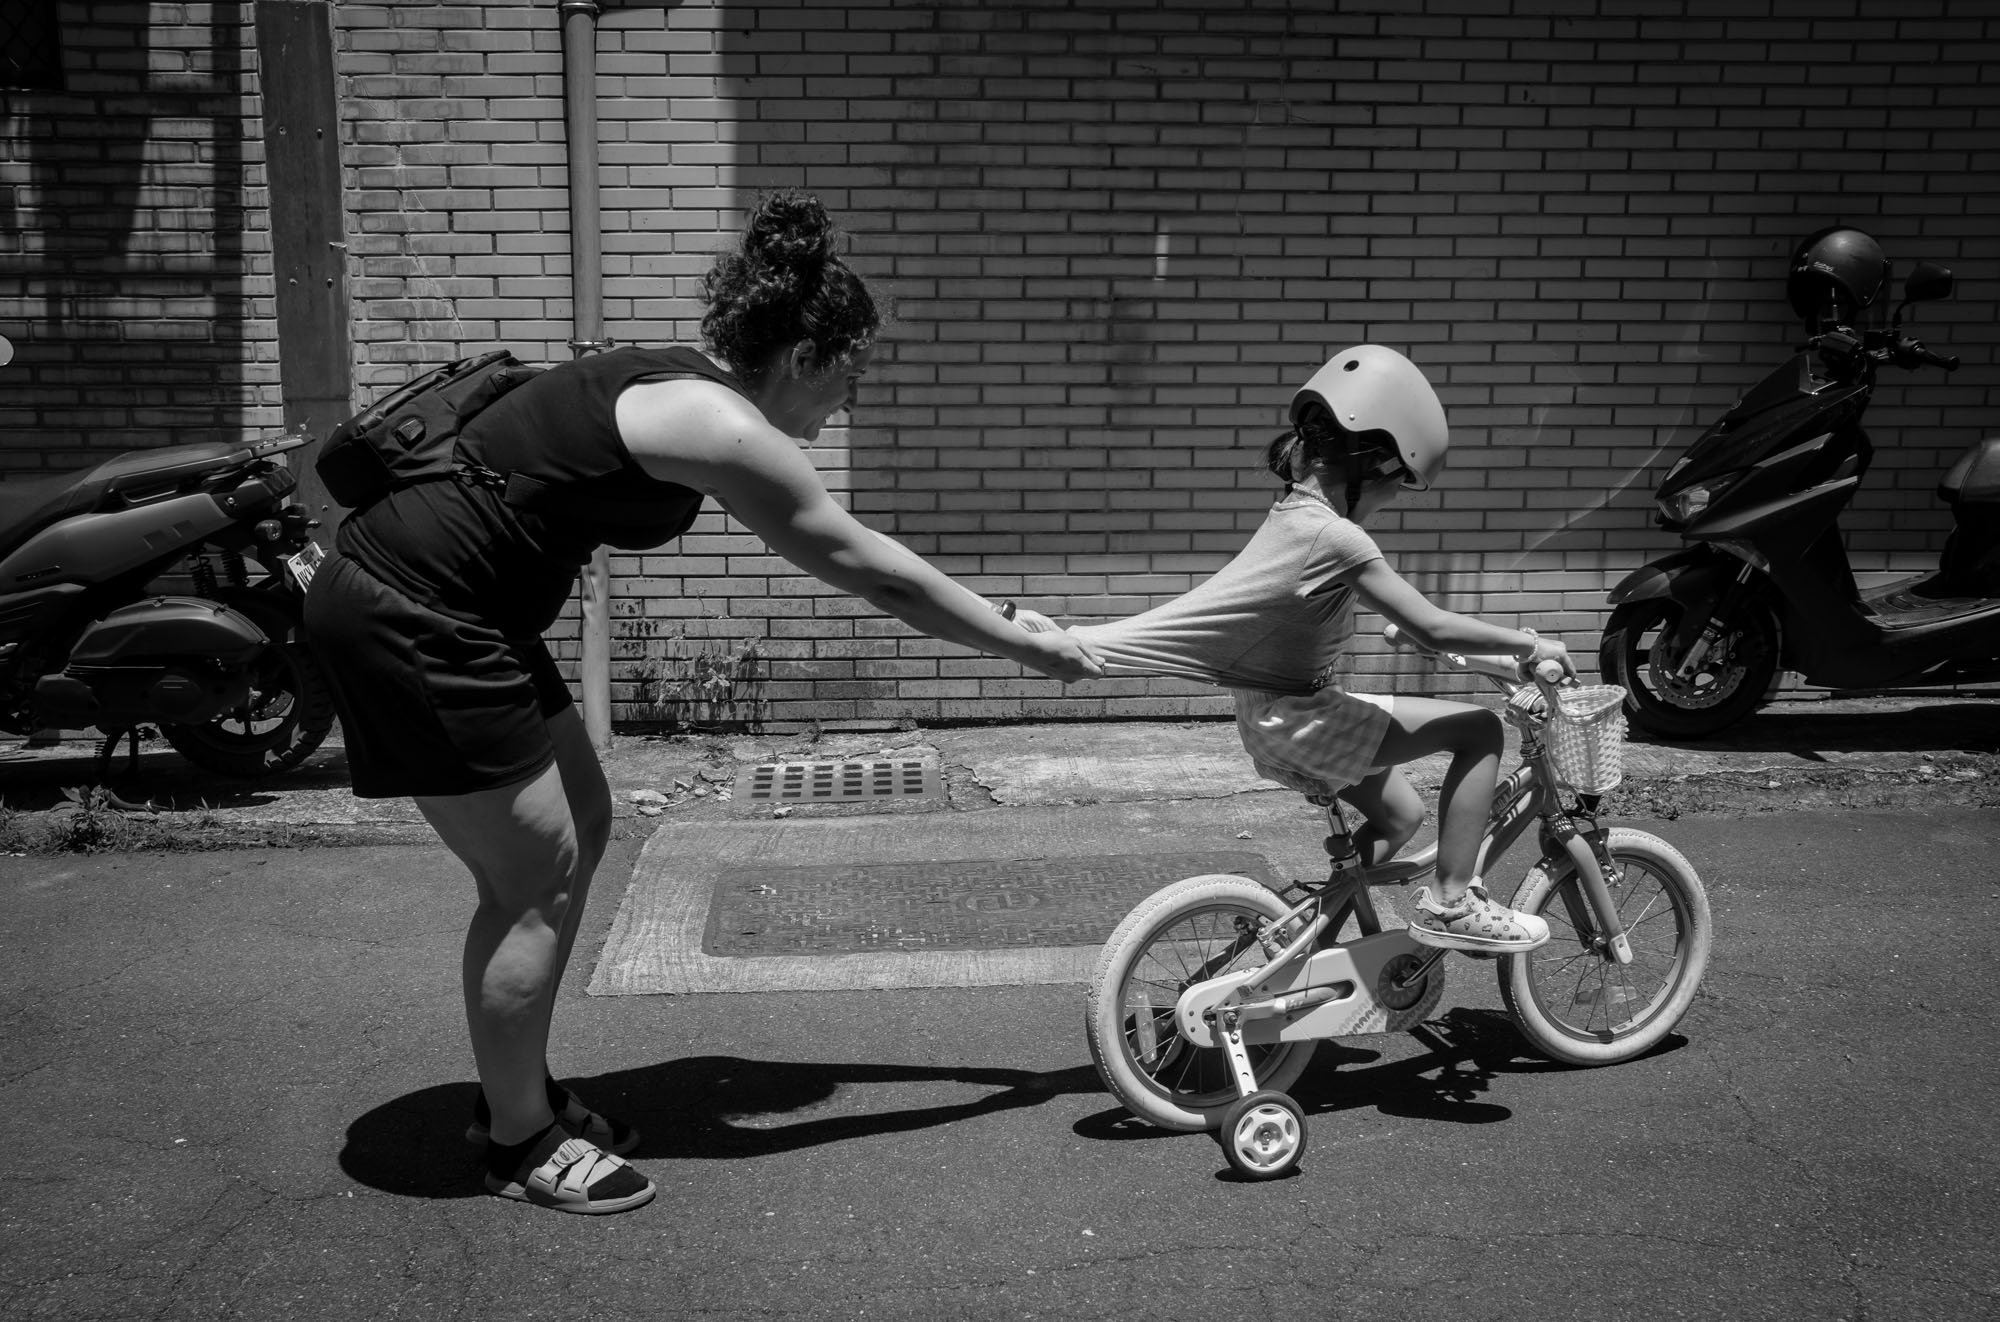 A mother grabs onto the back of her young daughter's shirt as she tries to ride away on her bike in Taipei, Taiwan. 